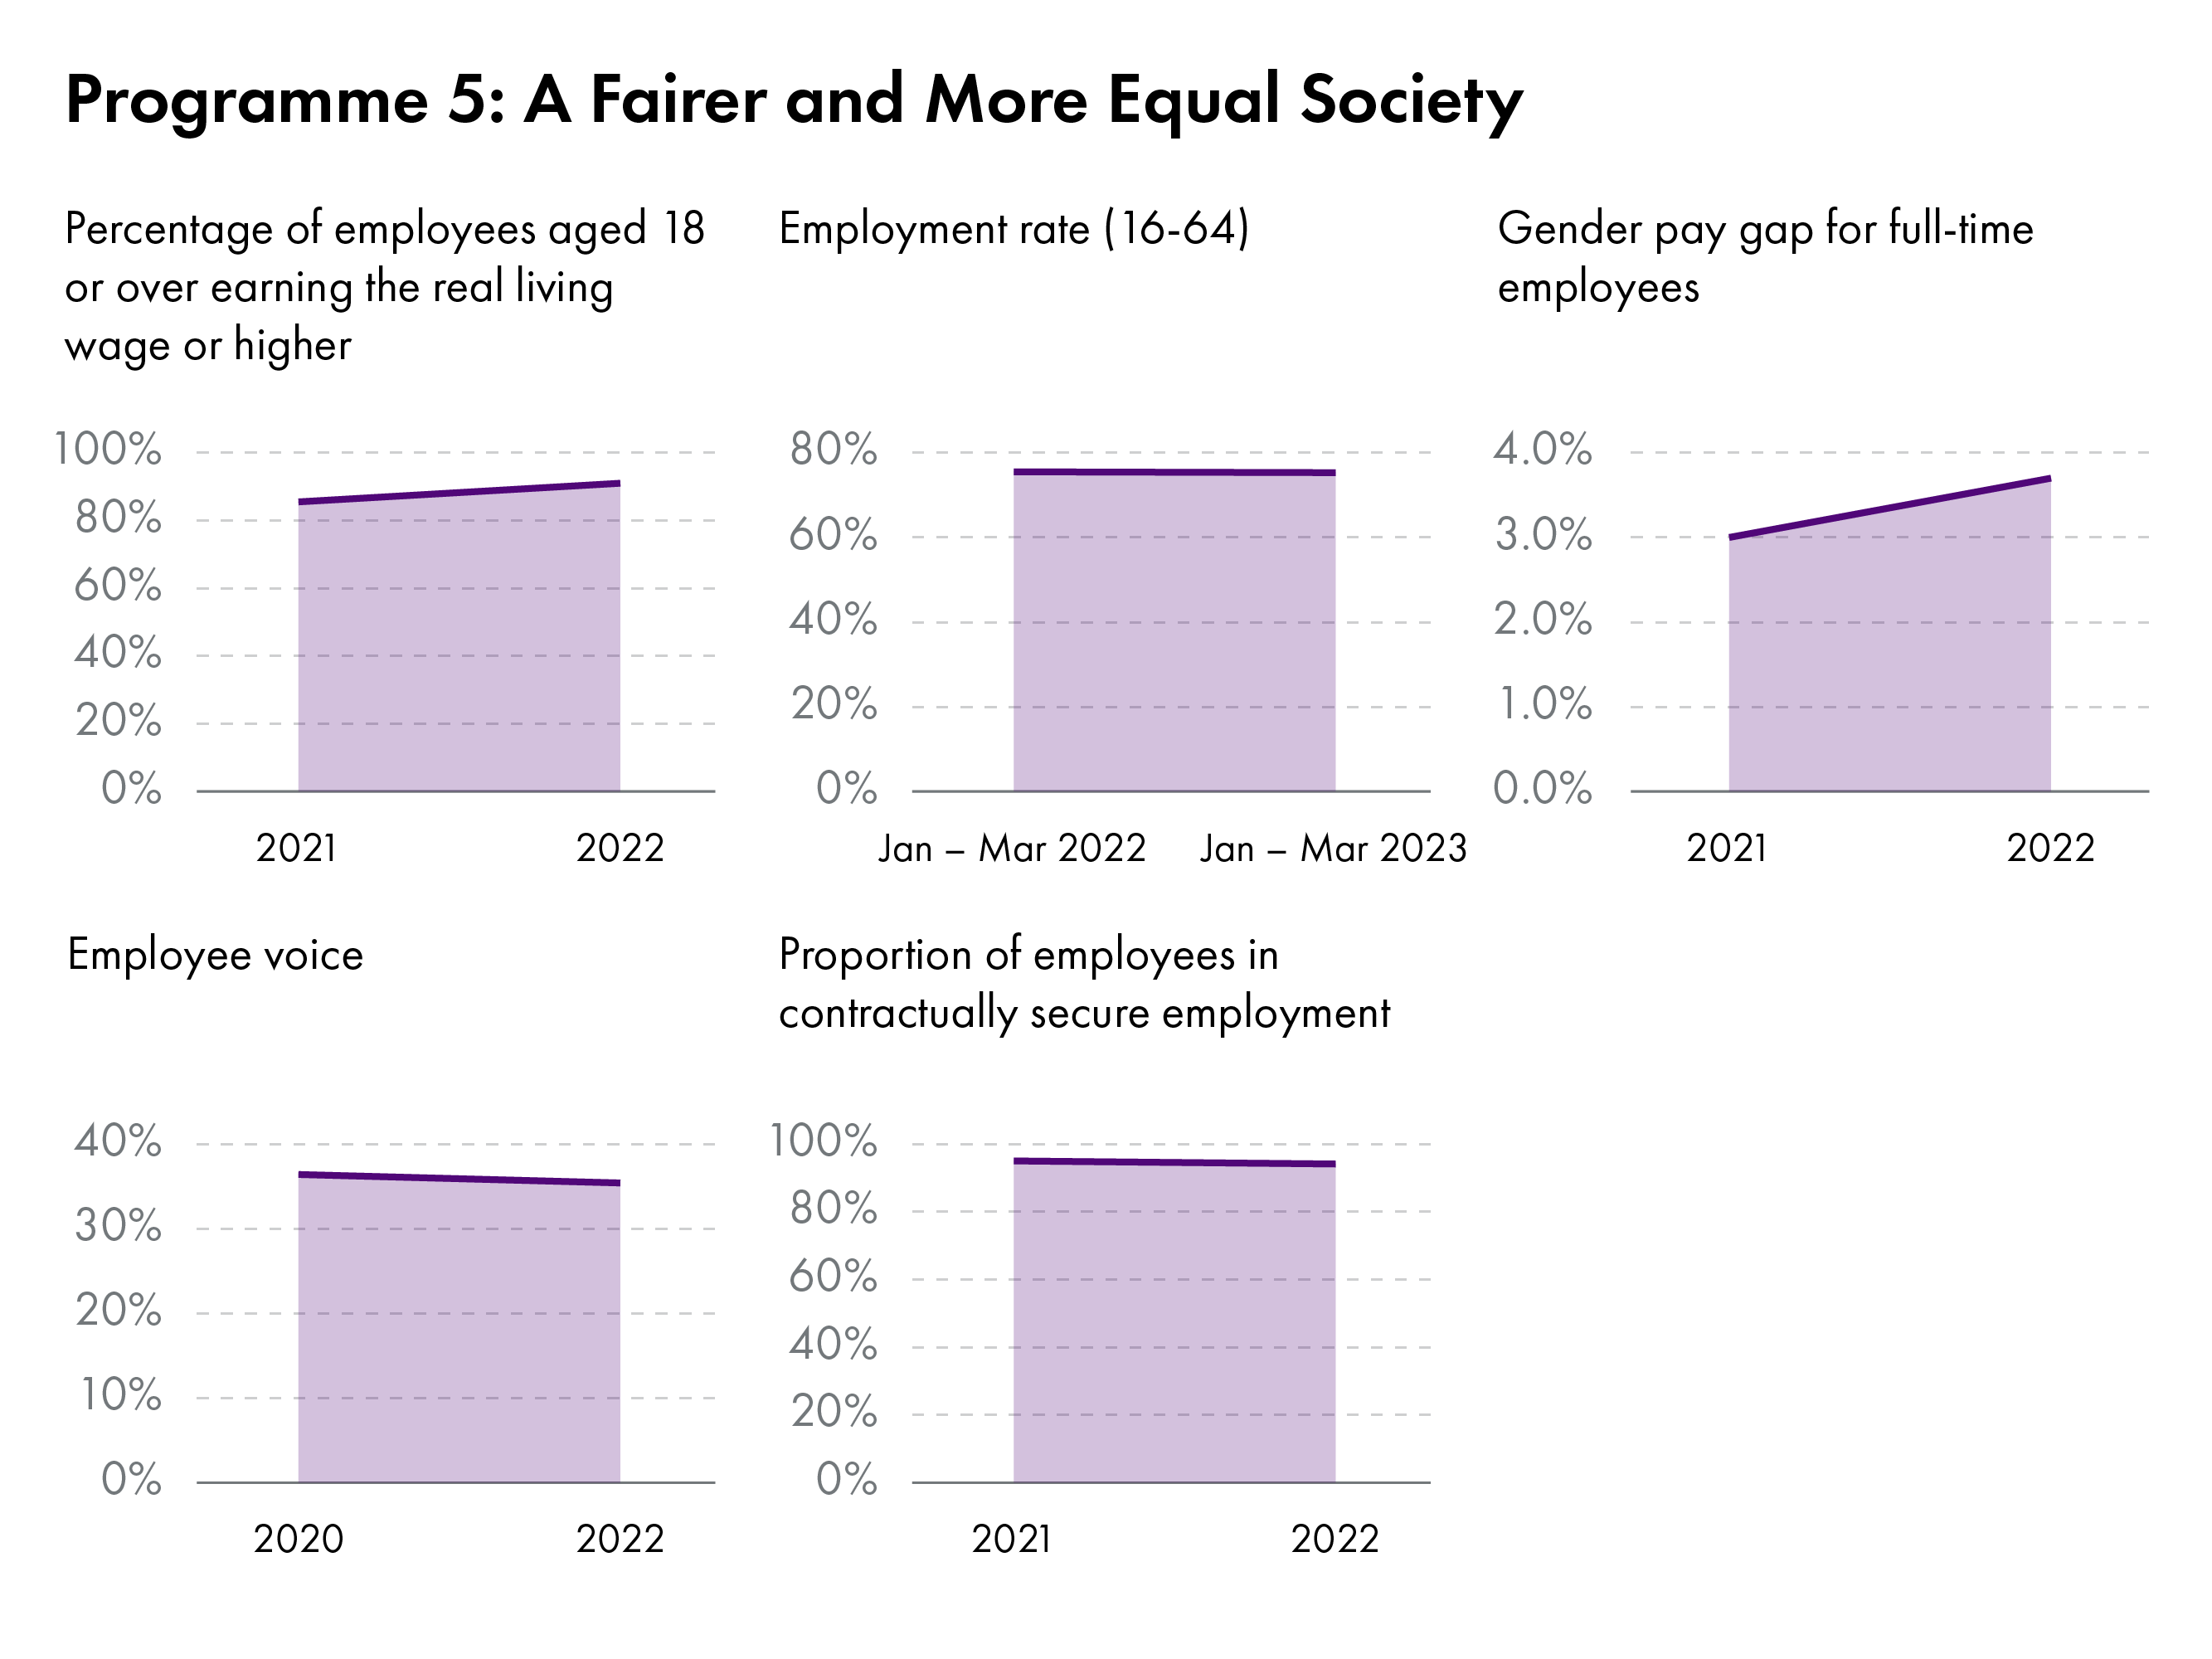 The key indicators for the ‘A Fairer and More Equal Society’ programme are the percentage of employees earning real living wage, the employment rate, gender pay gap, employee voice and proportion of contracted employees in contractually secure employment